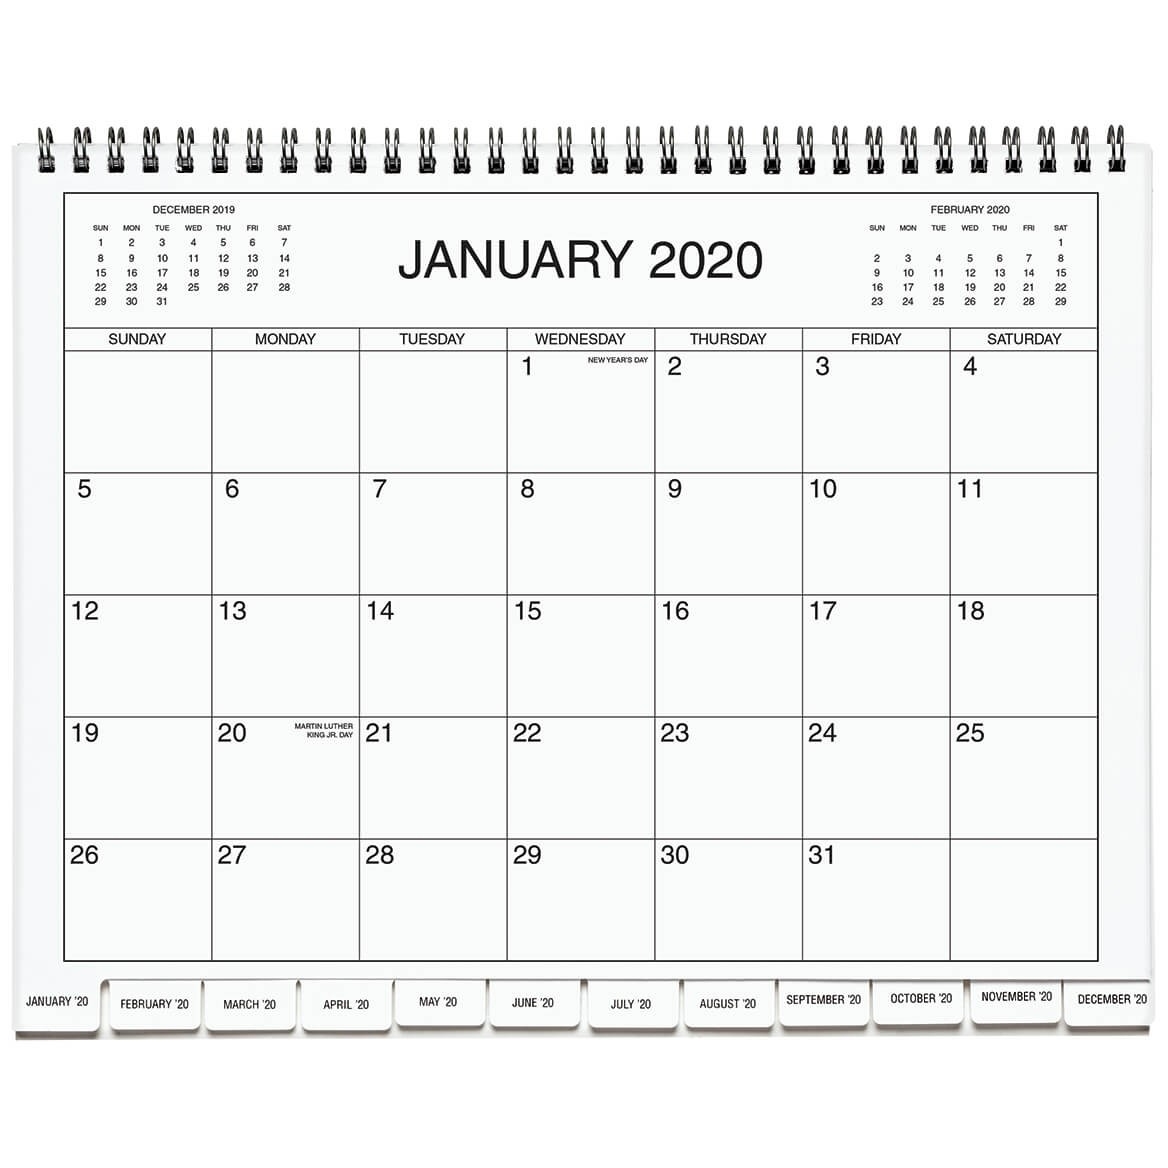 Calendars And Planners – Organizational Tools 3 Year Calendar Reference Printable 2020-2022